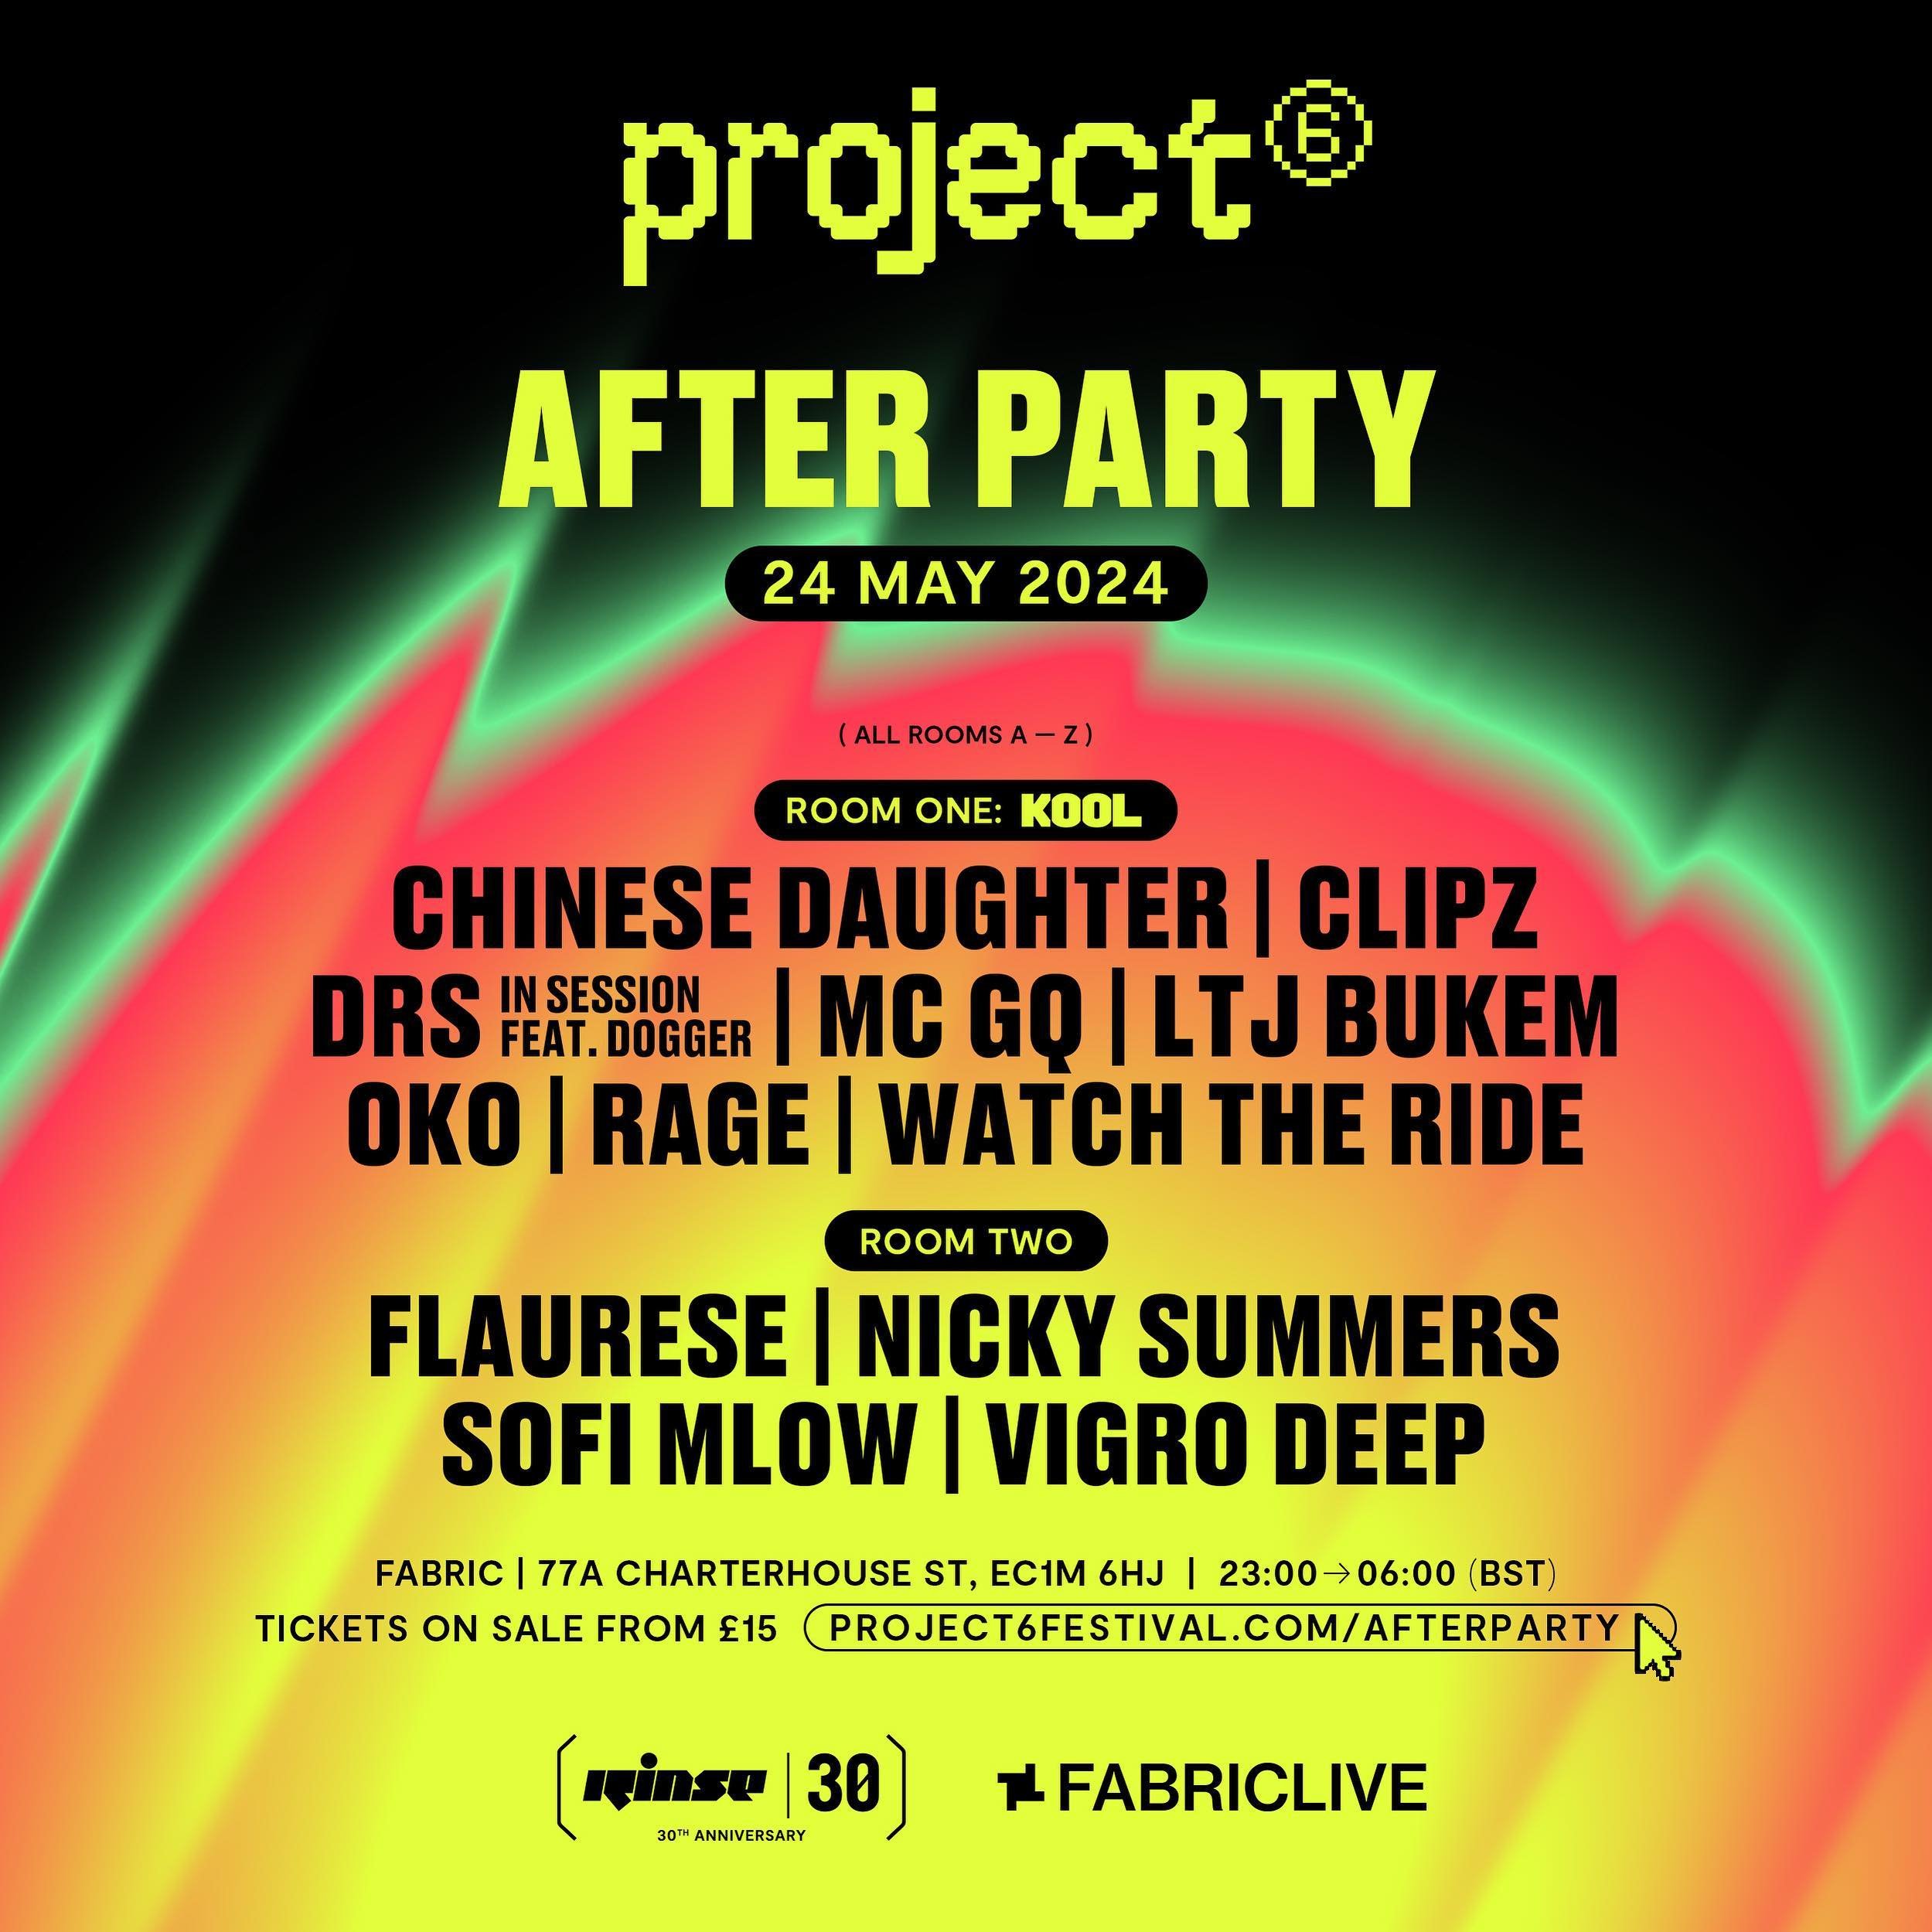 We&rsquo;re gassed to partner with FABRICLIVE to present our official Project 6 after party!! Continuing the vibes into the early hours with:

LTJ BUKEM, CLIPZ, WATCH THE RIDE, DRS ( ft. DOGGER), CHINESE DAUGHTER, &amp; OKO with MCs - MC GQ &amp; RAG